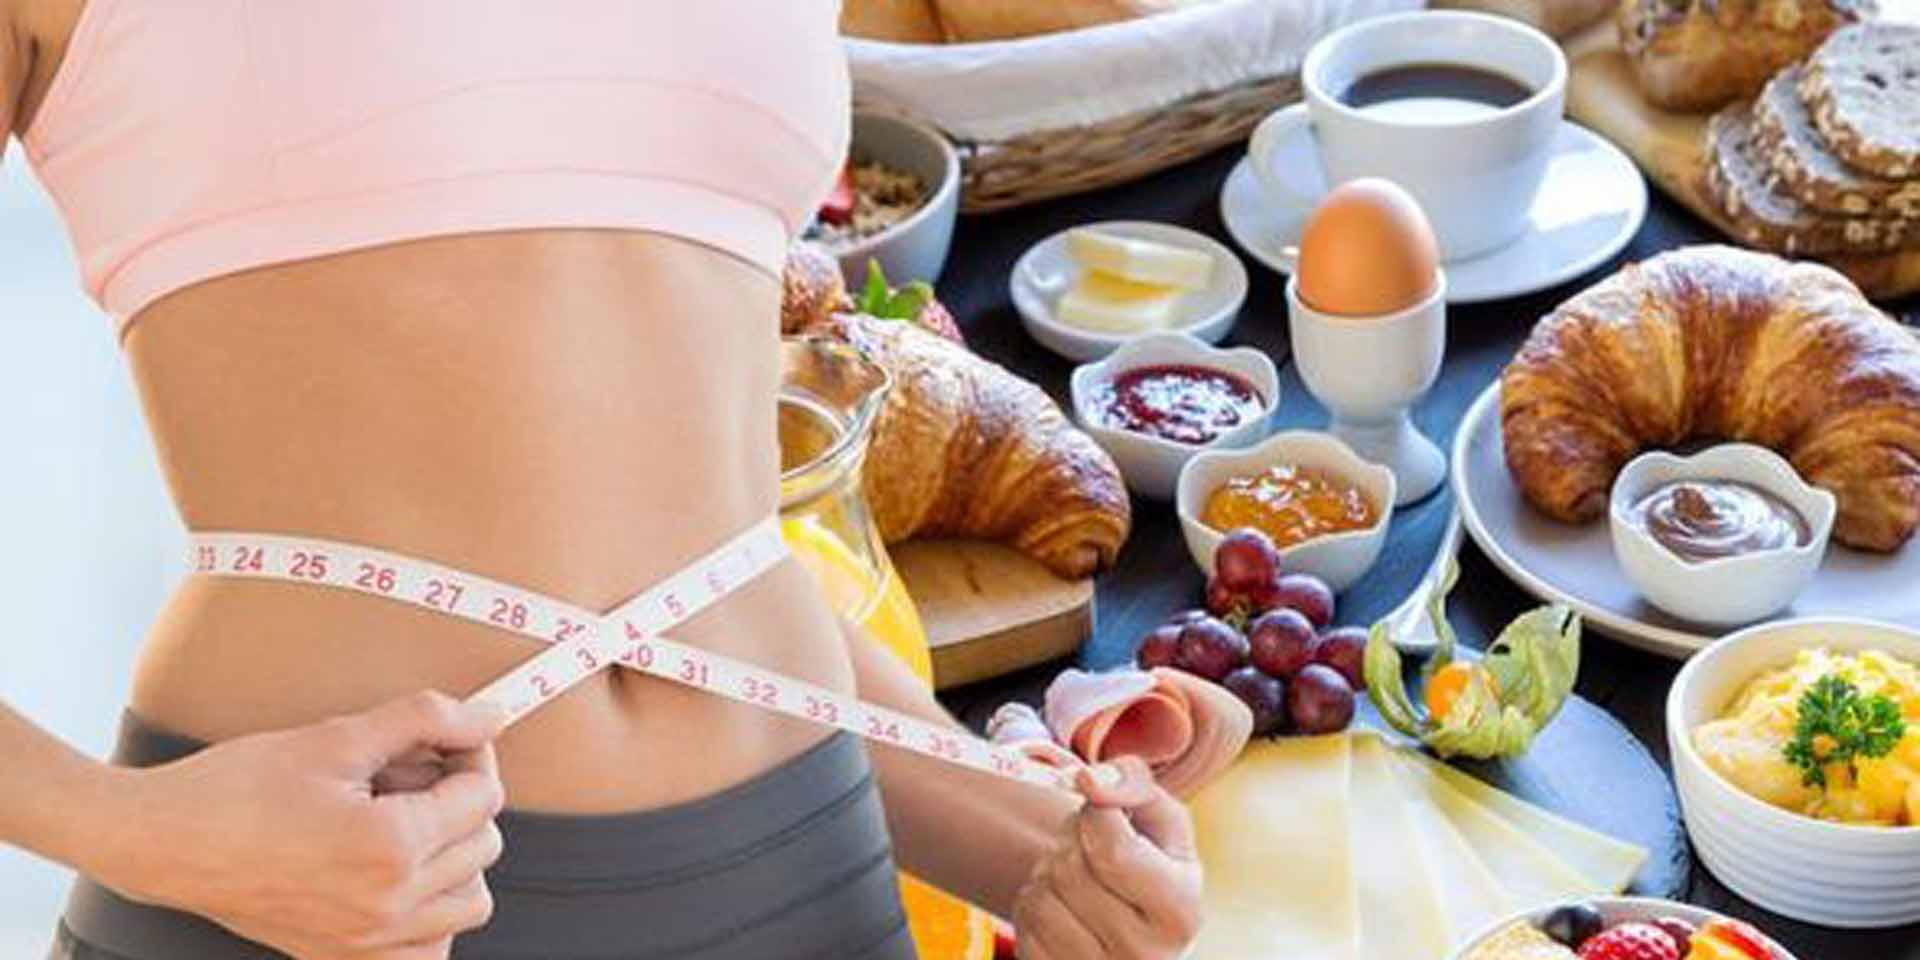 How can you lose weight with a healthy breakfast?